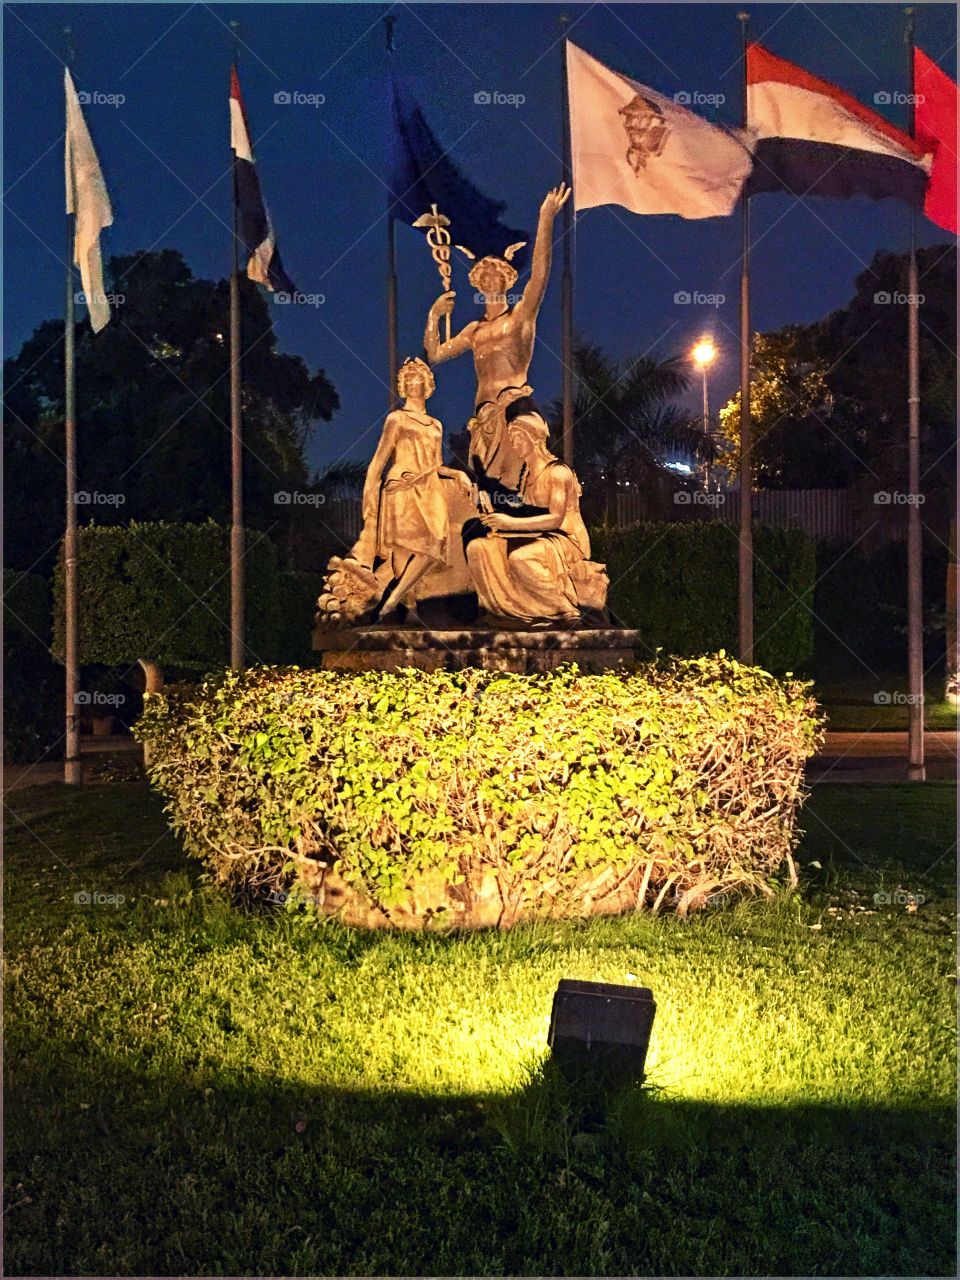 Cairo Opera House, Zamalik, Egypt. Shows the beauty of sculpture at night with special lighting technique, in the background flags of different countries and nations to show unity ❤️